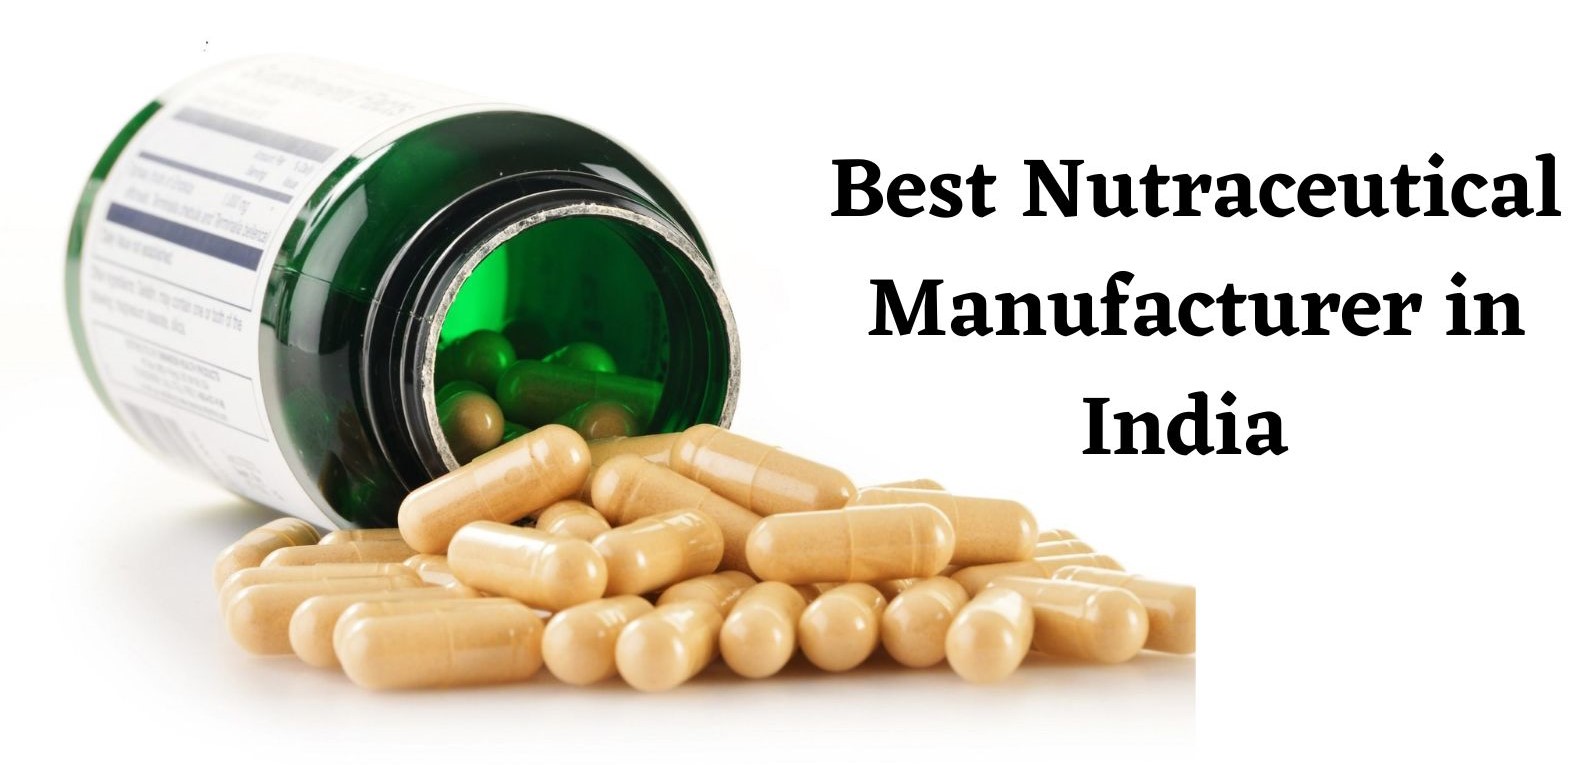 Best Nutraceutical Manufacturers in India